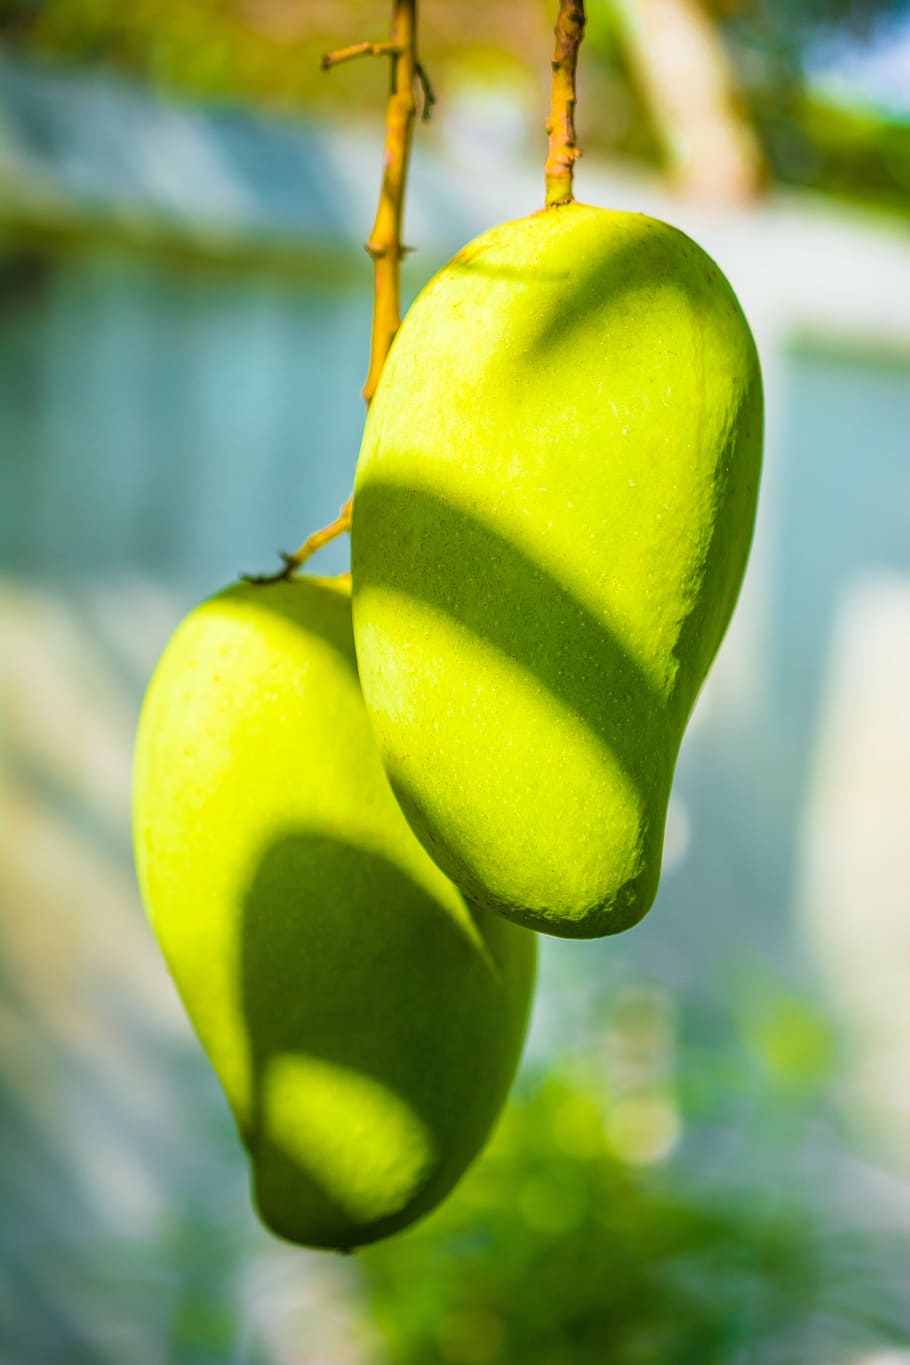 mango, mango tree, fruits, fruit, green mango, green color, focus on foreground, close-up, food and drink, freshness